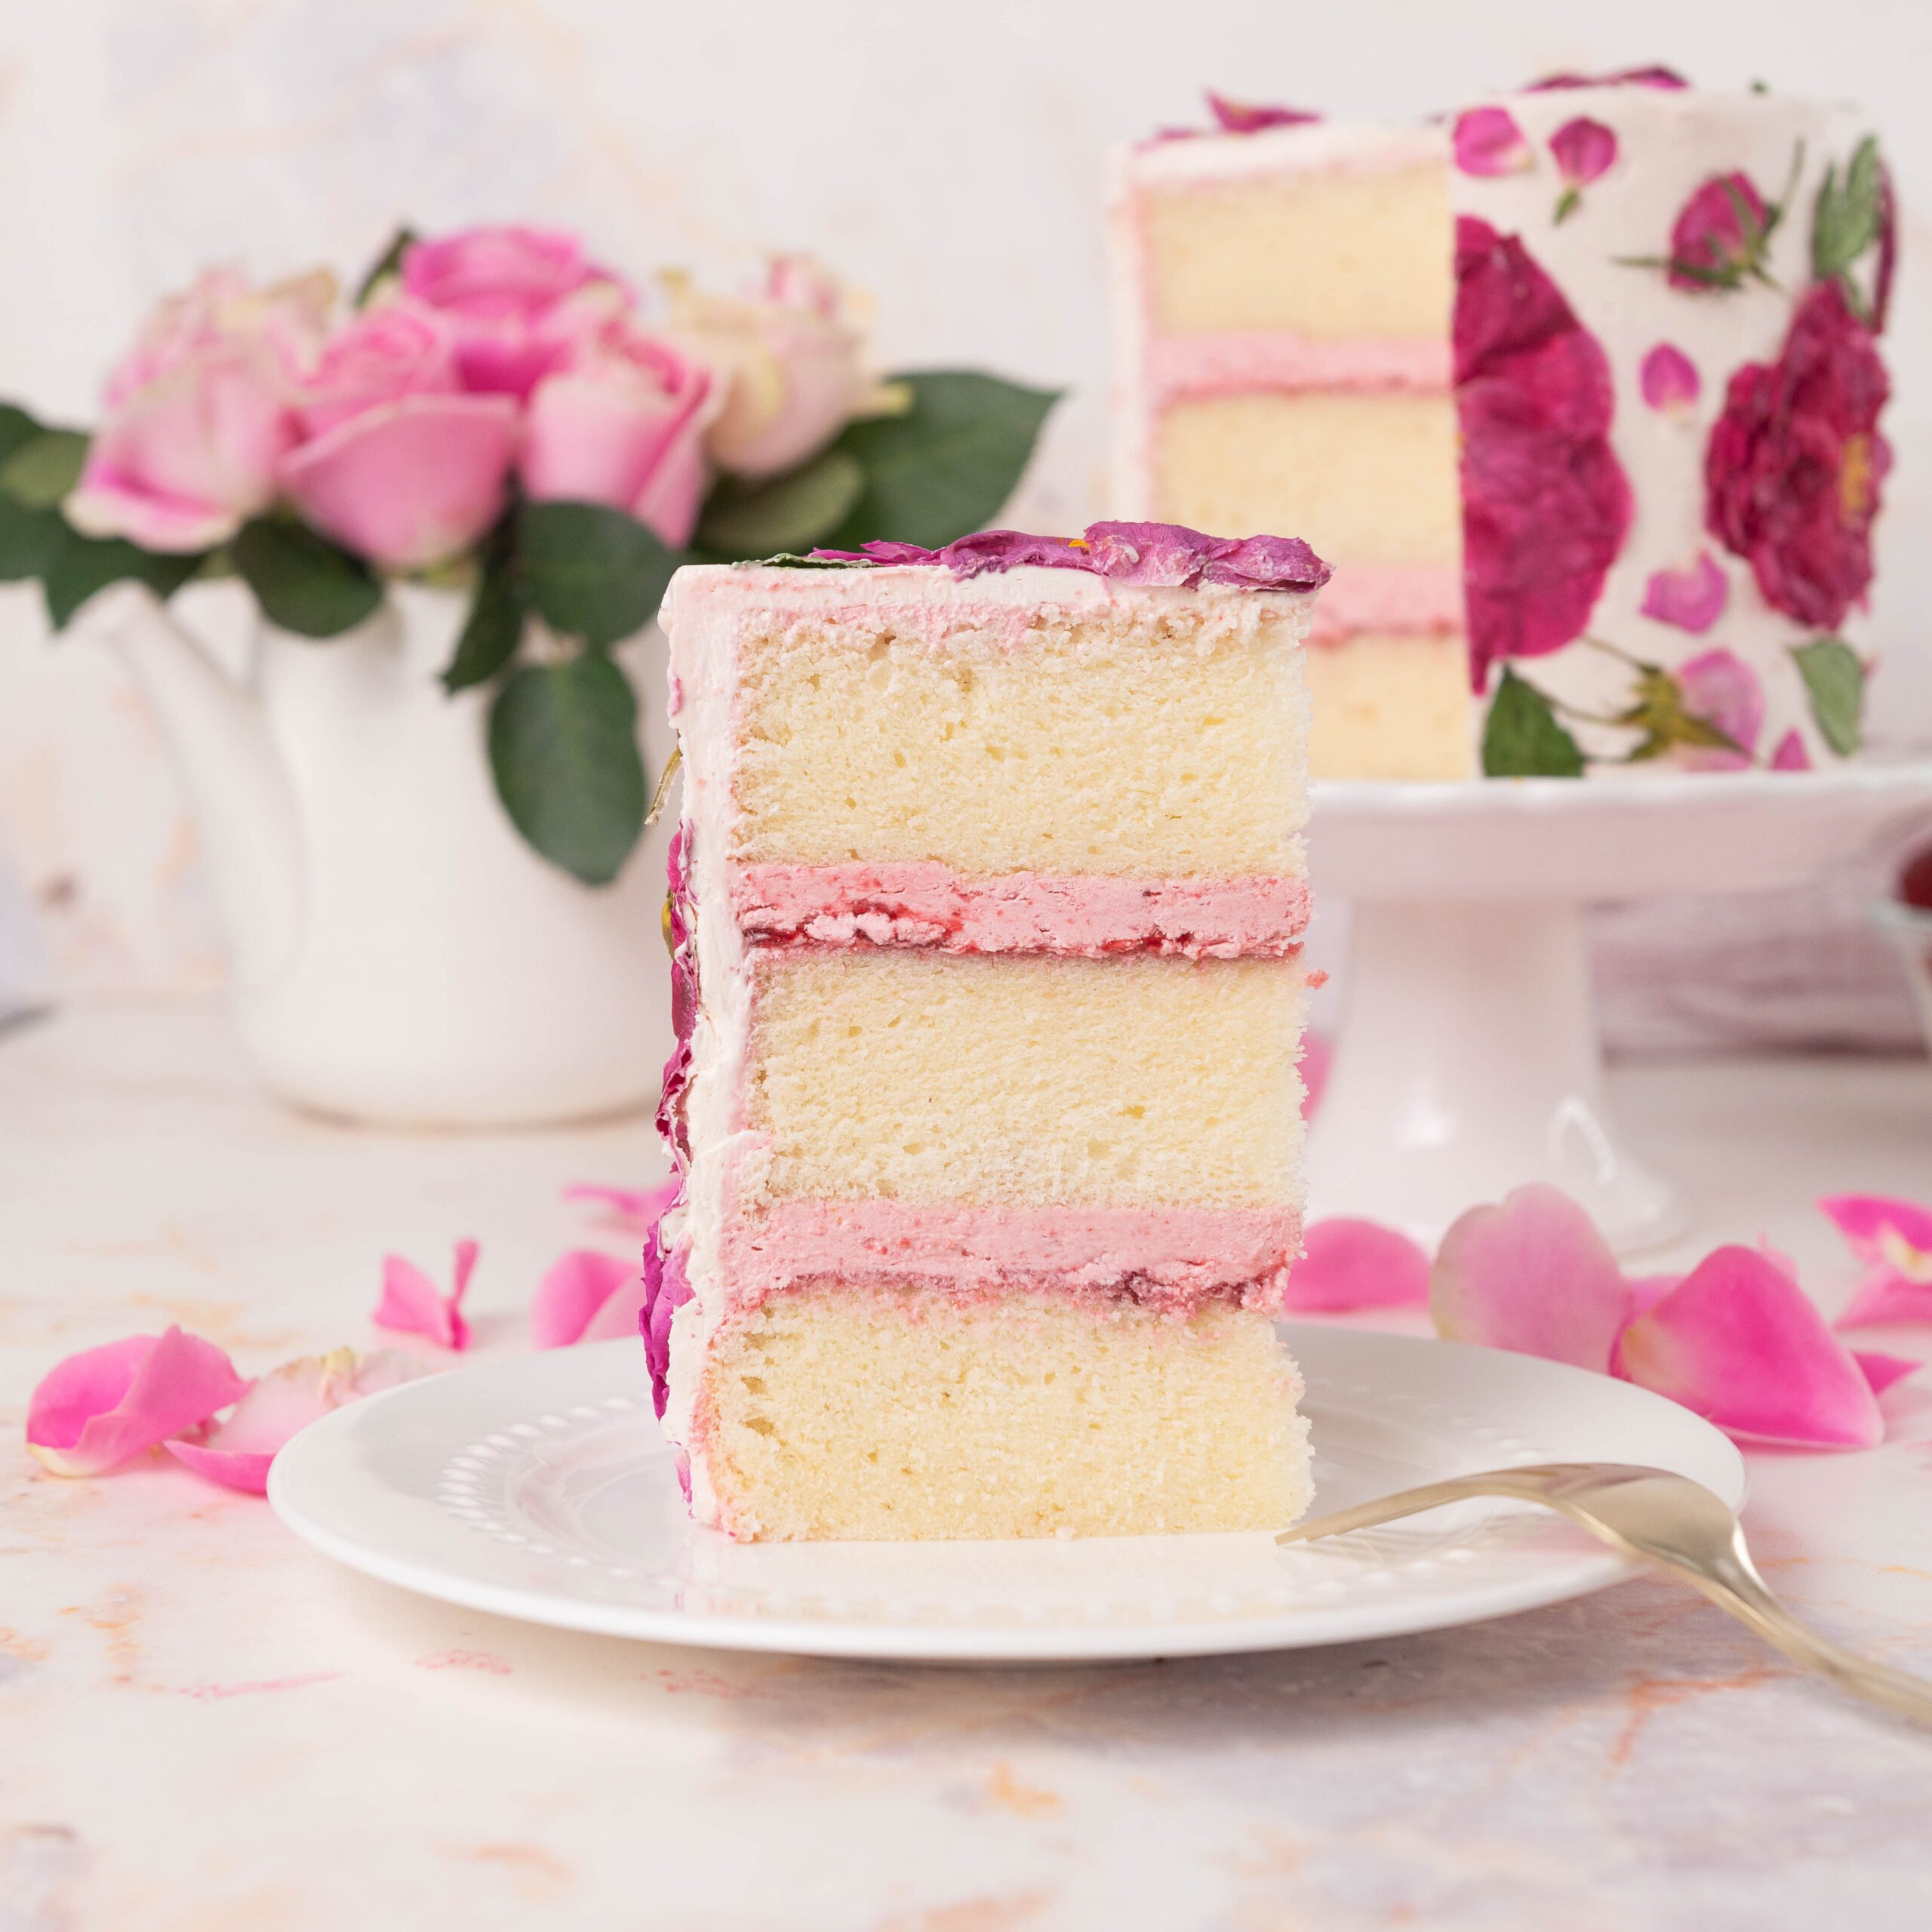 Picture of rose cake slice on a plate